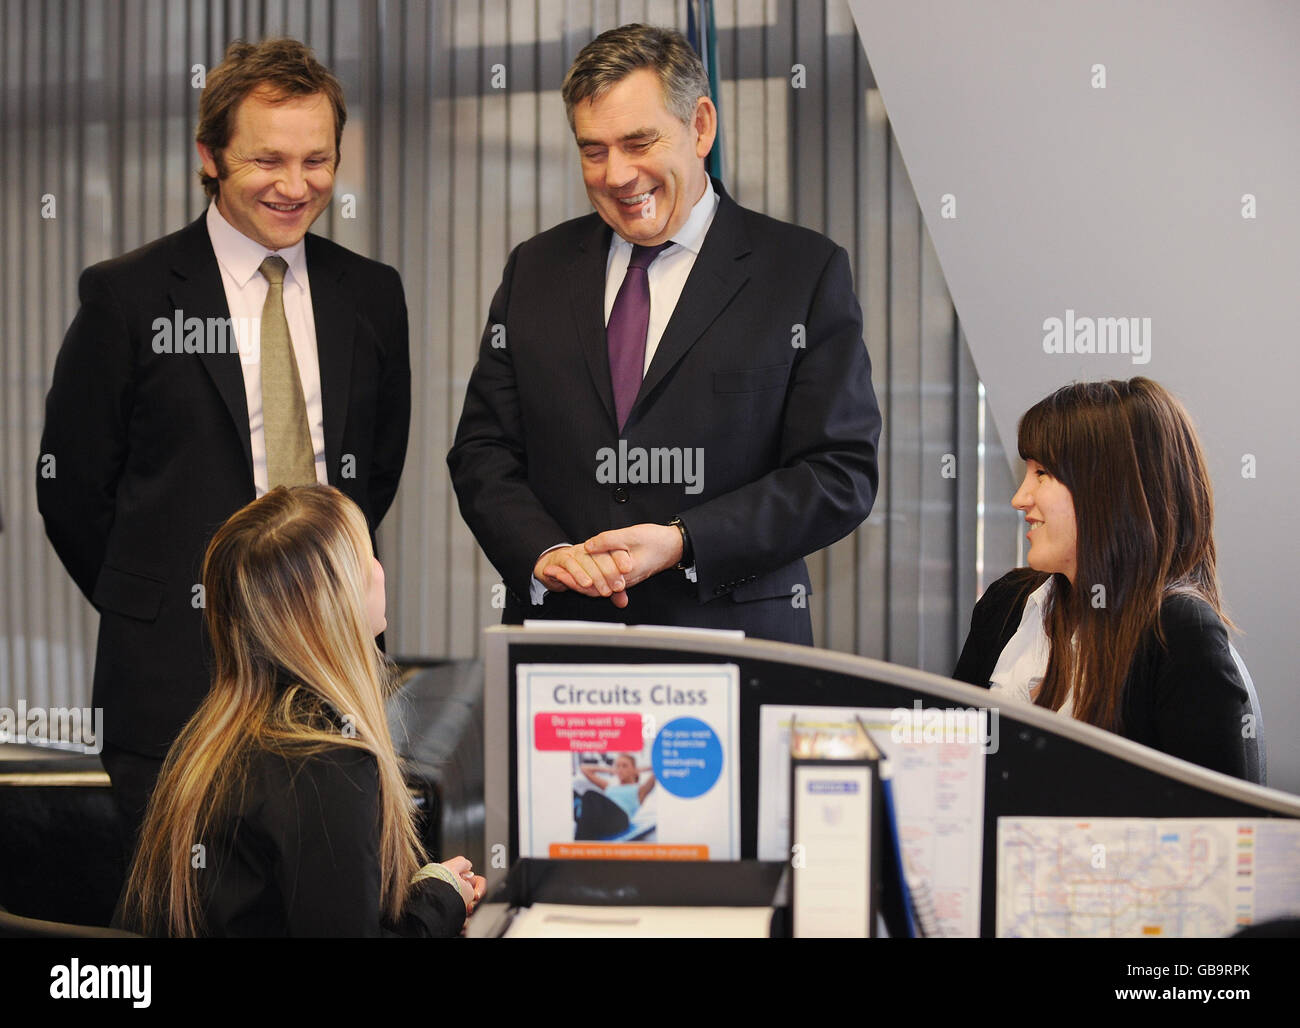 Britain's Prime Minister Gordon Brown (centre) and Work and Pensions Secretary James Purnell during a visit to Work Directions in London's King's Cross, which is a private sector organisation providing employment support and advice to those on incapacity benefit or income support. Stock Photo